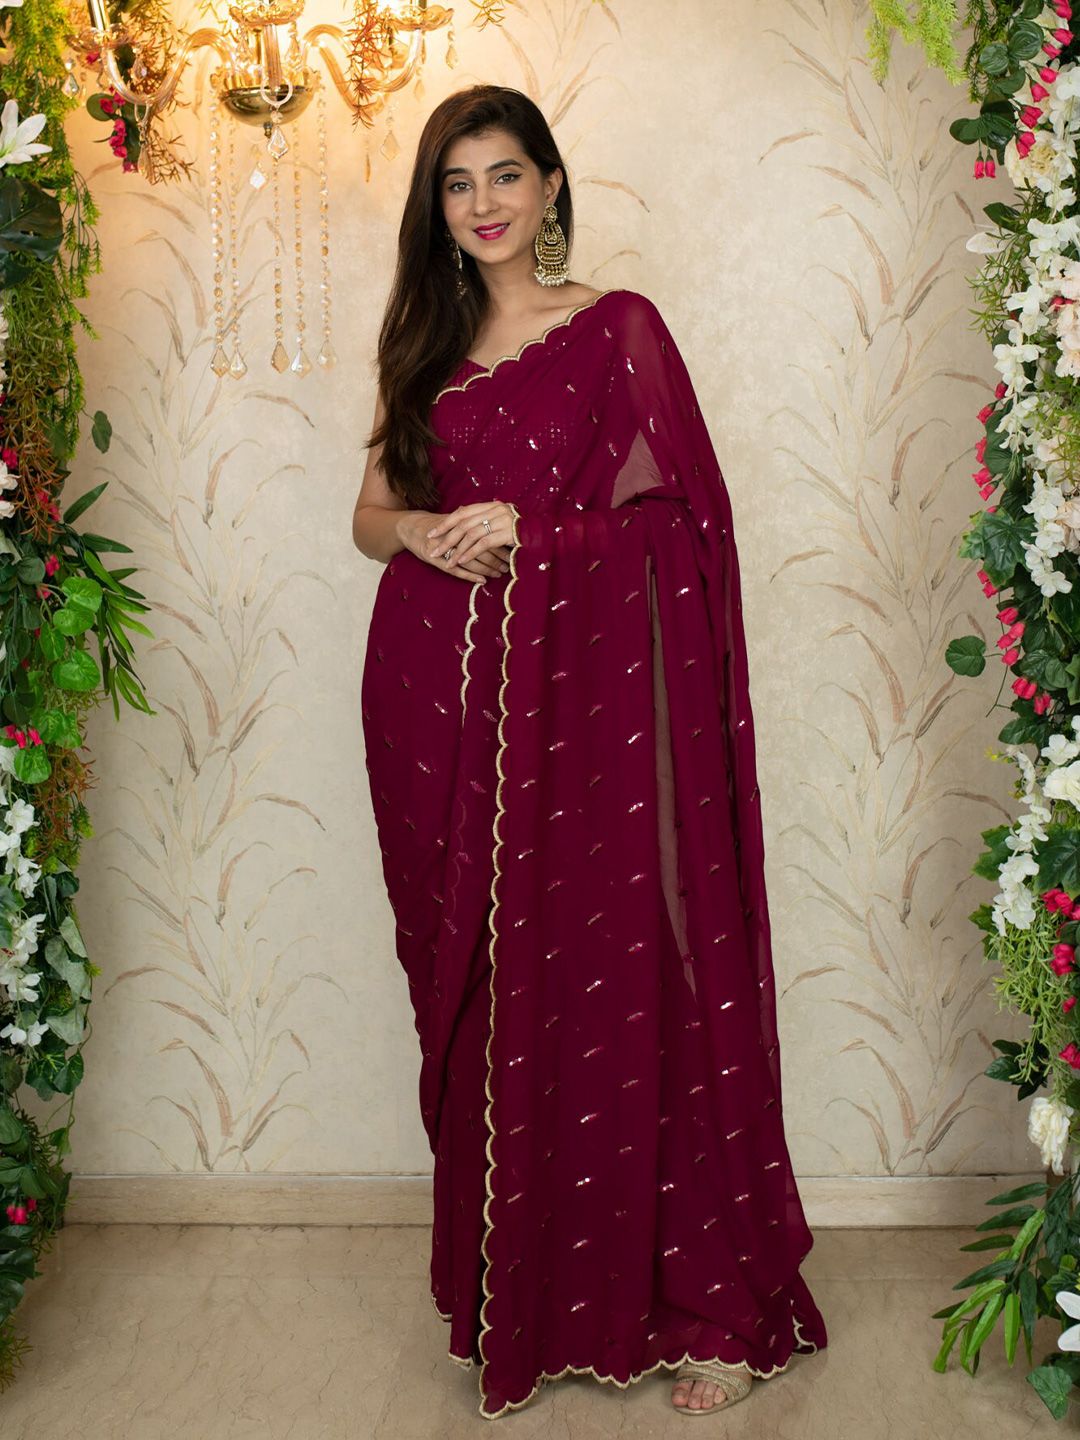 Label Shaurya Sanadhya Embroidered Sequined Pure Georgette Saree Price in India